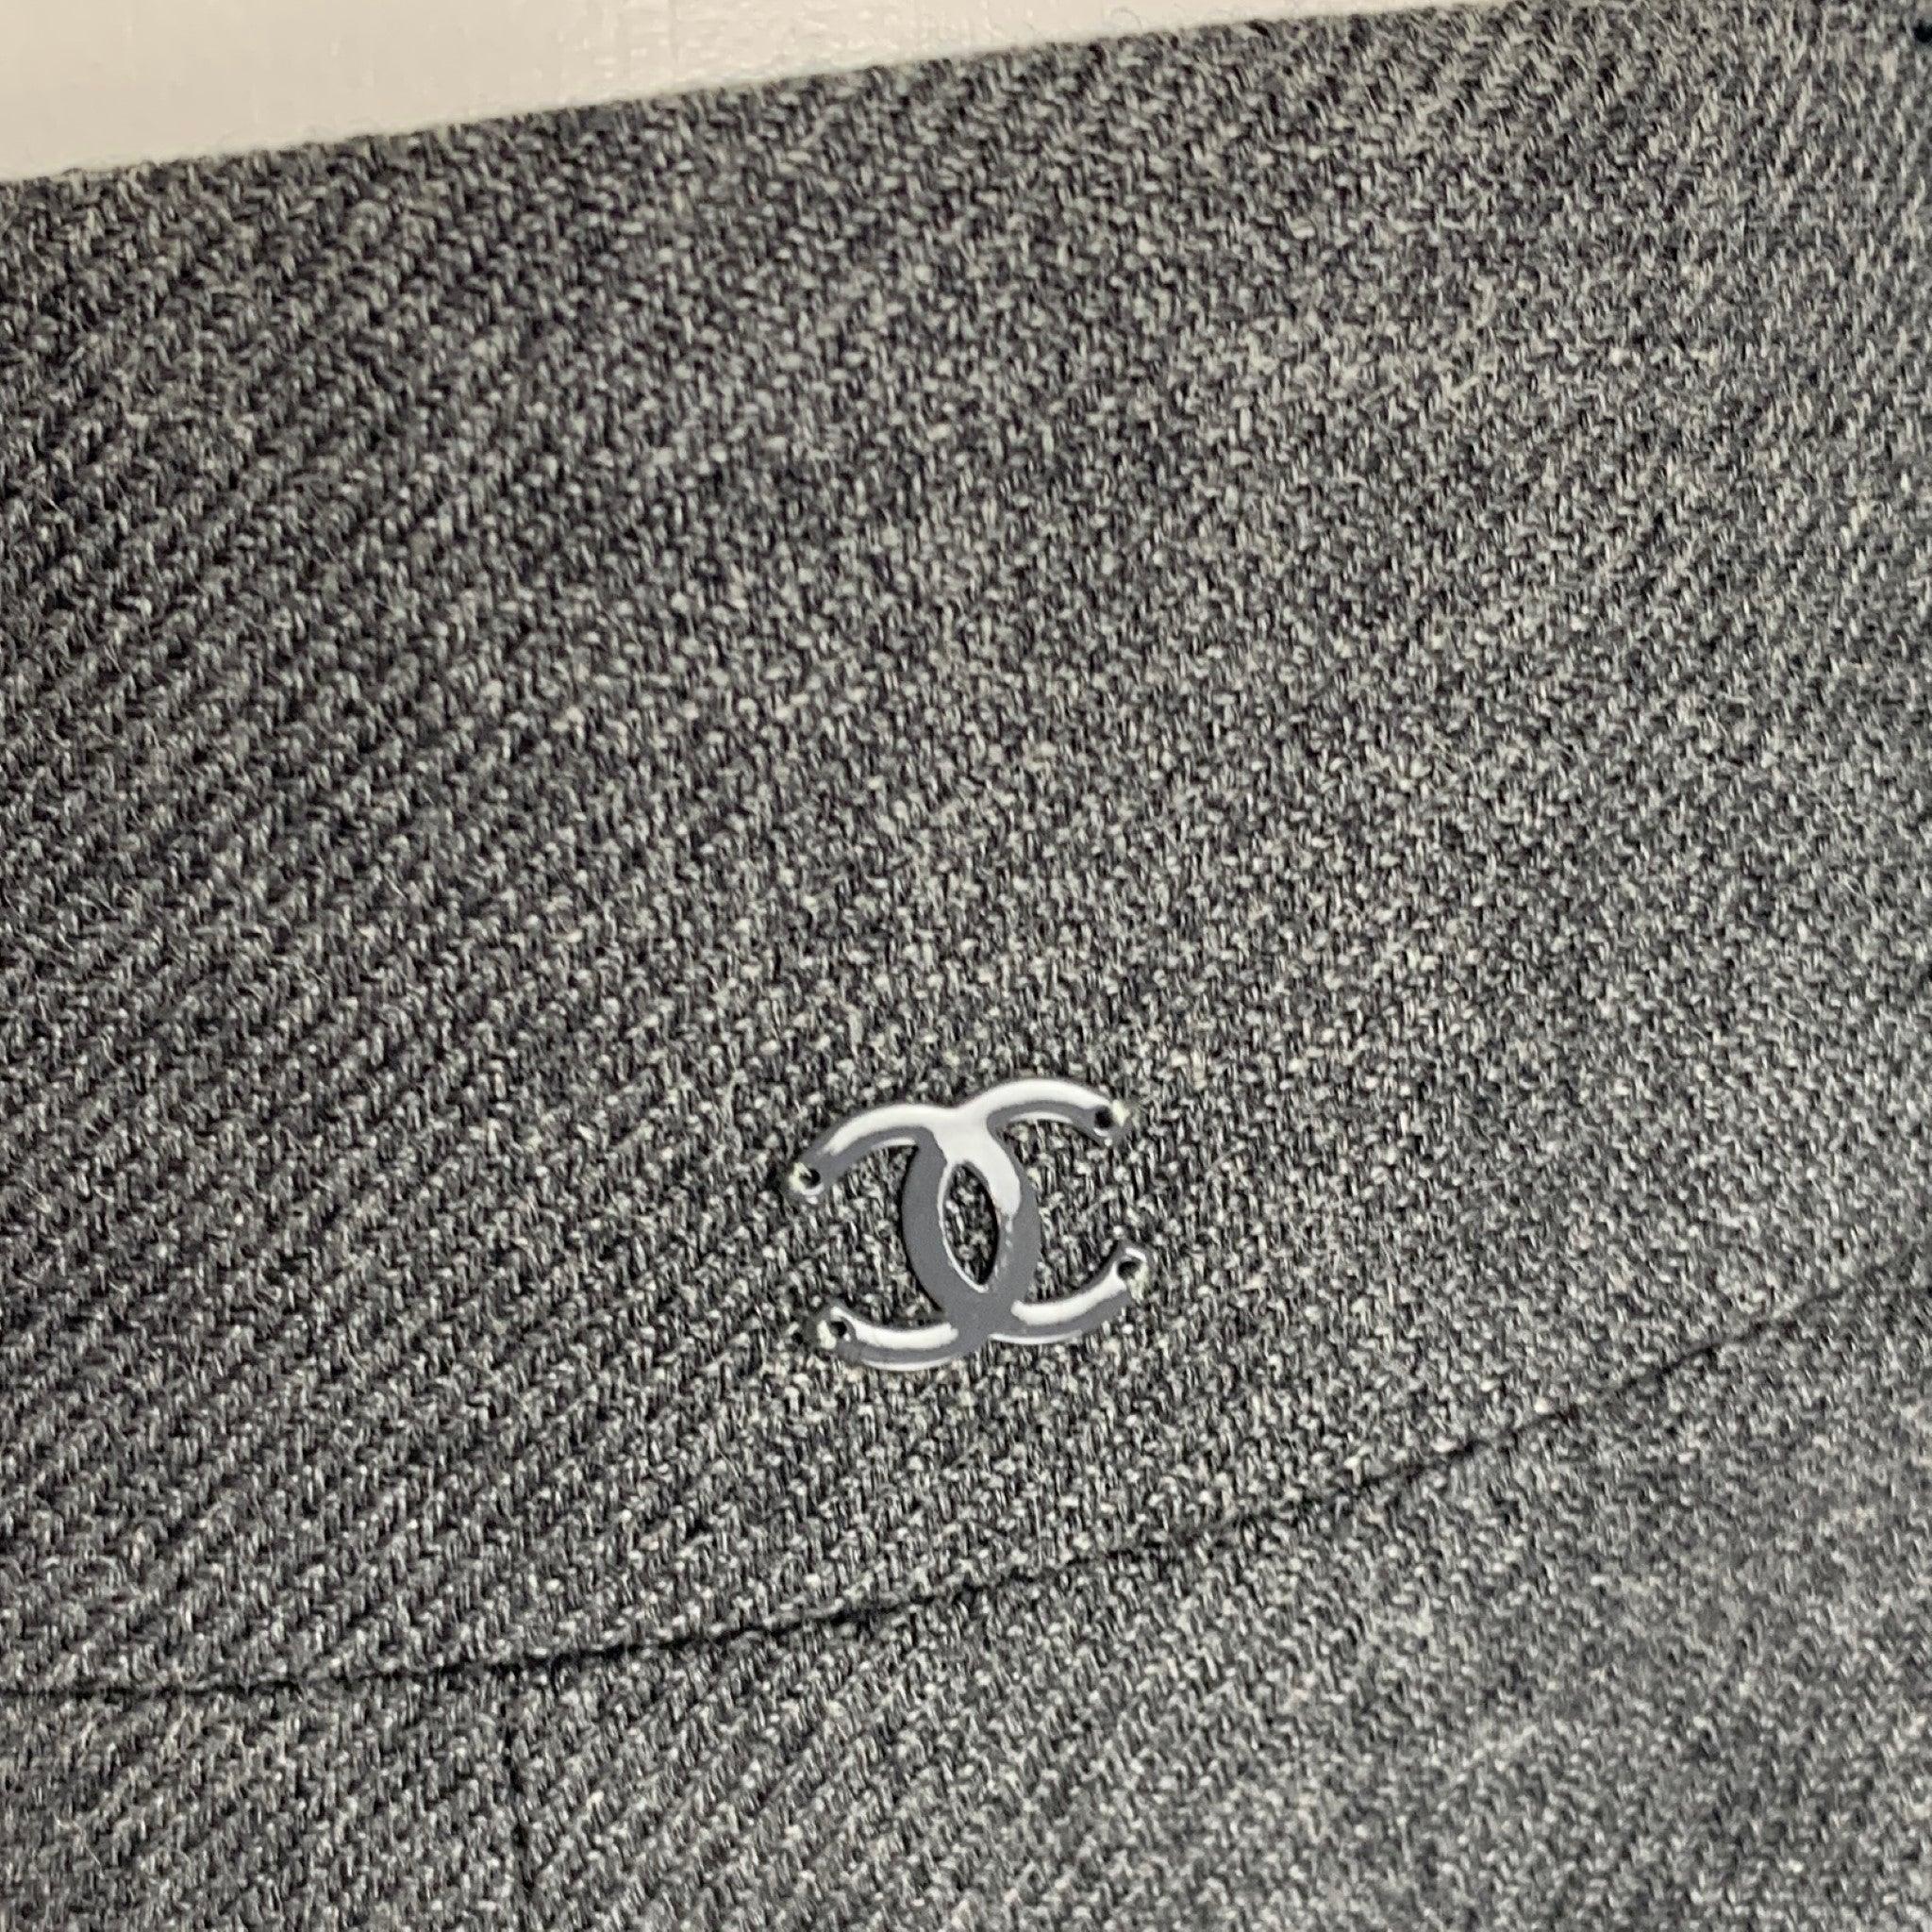 CHANEL skirt
in a grey linen cashmere blend fabric featuring a flared A-line style, signature monogram detail, and a back zipper closure. Made in France. Excellent Pre-Owned Condition. 

Marked:   34 

Measurements: 
  Waist: 26.5 inches Hip: 32